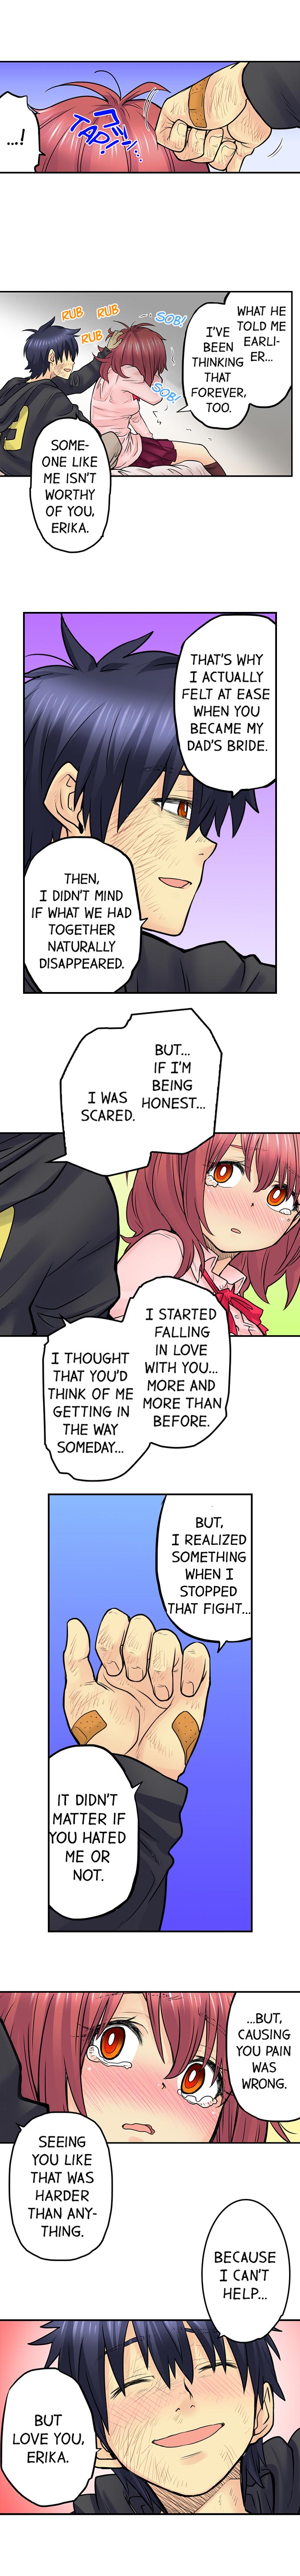 My Classmate is My Dad’s Bride, But in Bed She’s Mine - Chapter 35 Page 8